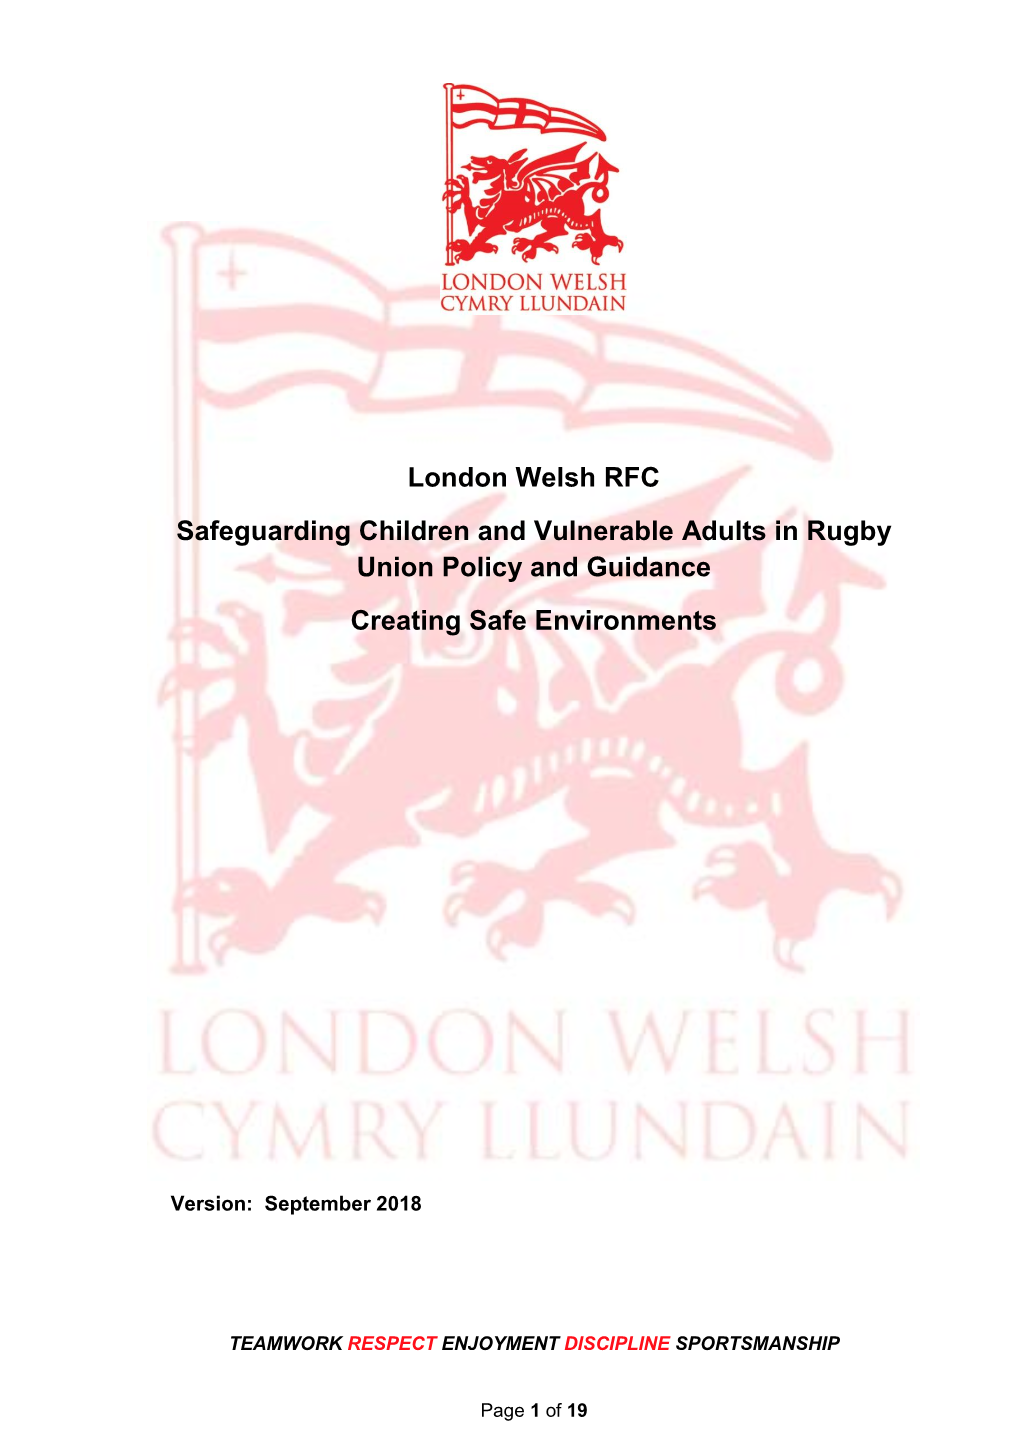 London Welsh RFC Safeguarding Children and Vulnerable Adults in Rugby Union Policy and Guidance Creating Safe Environments